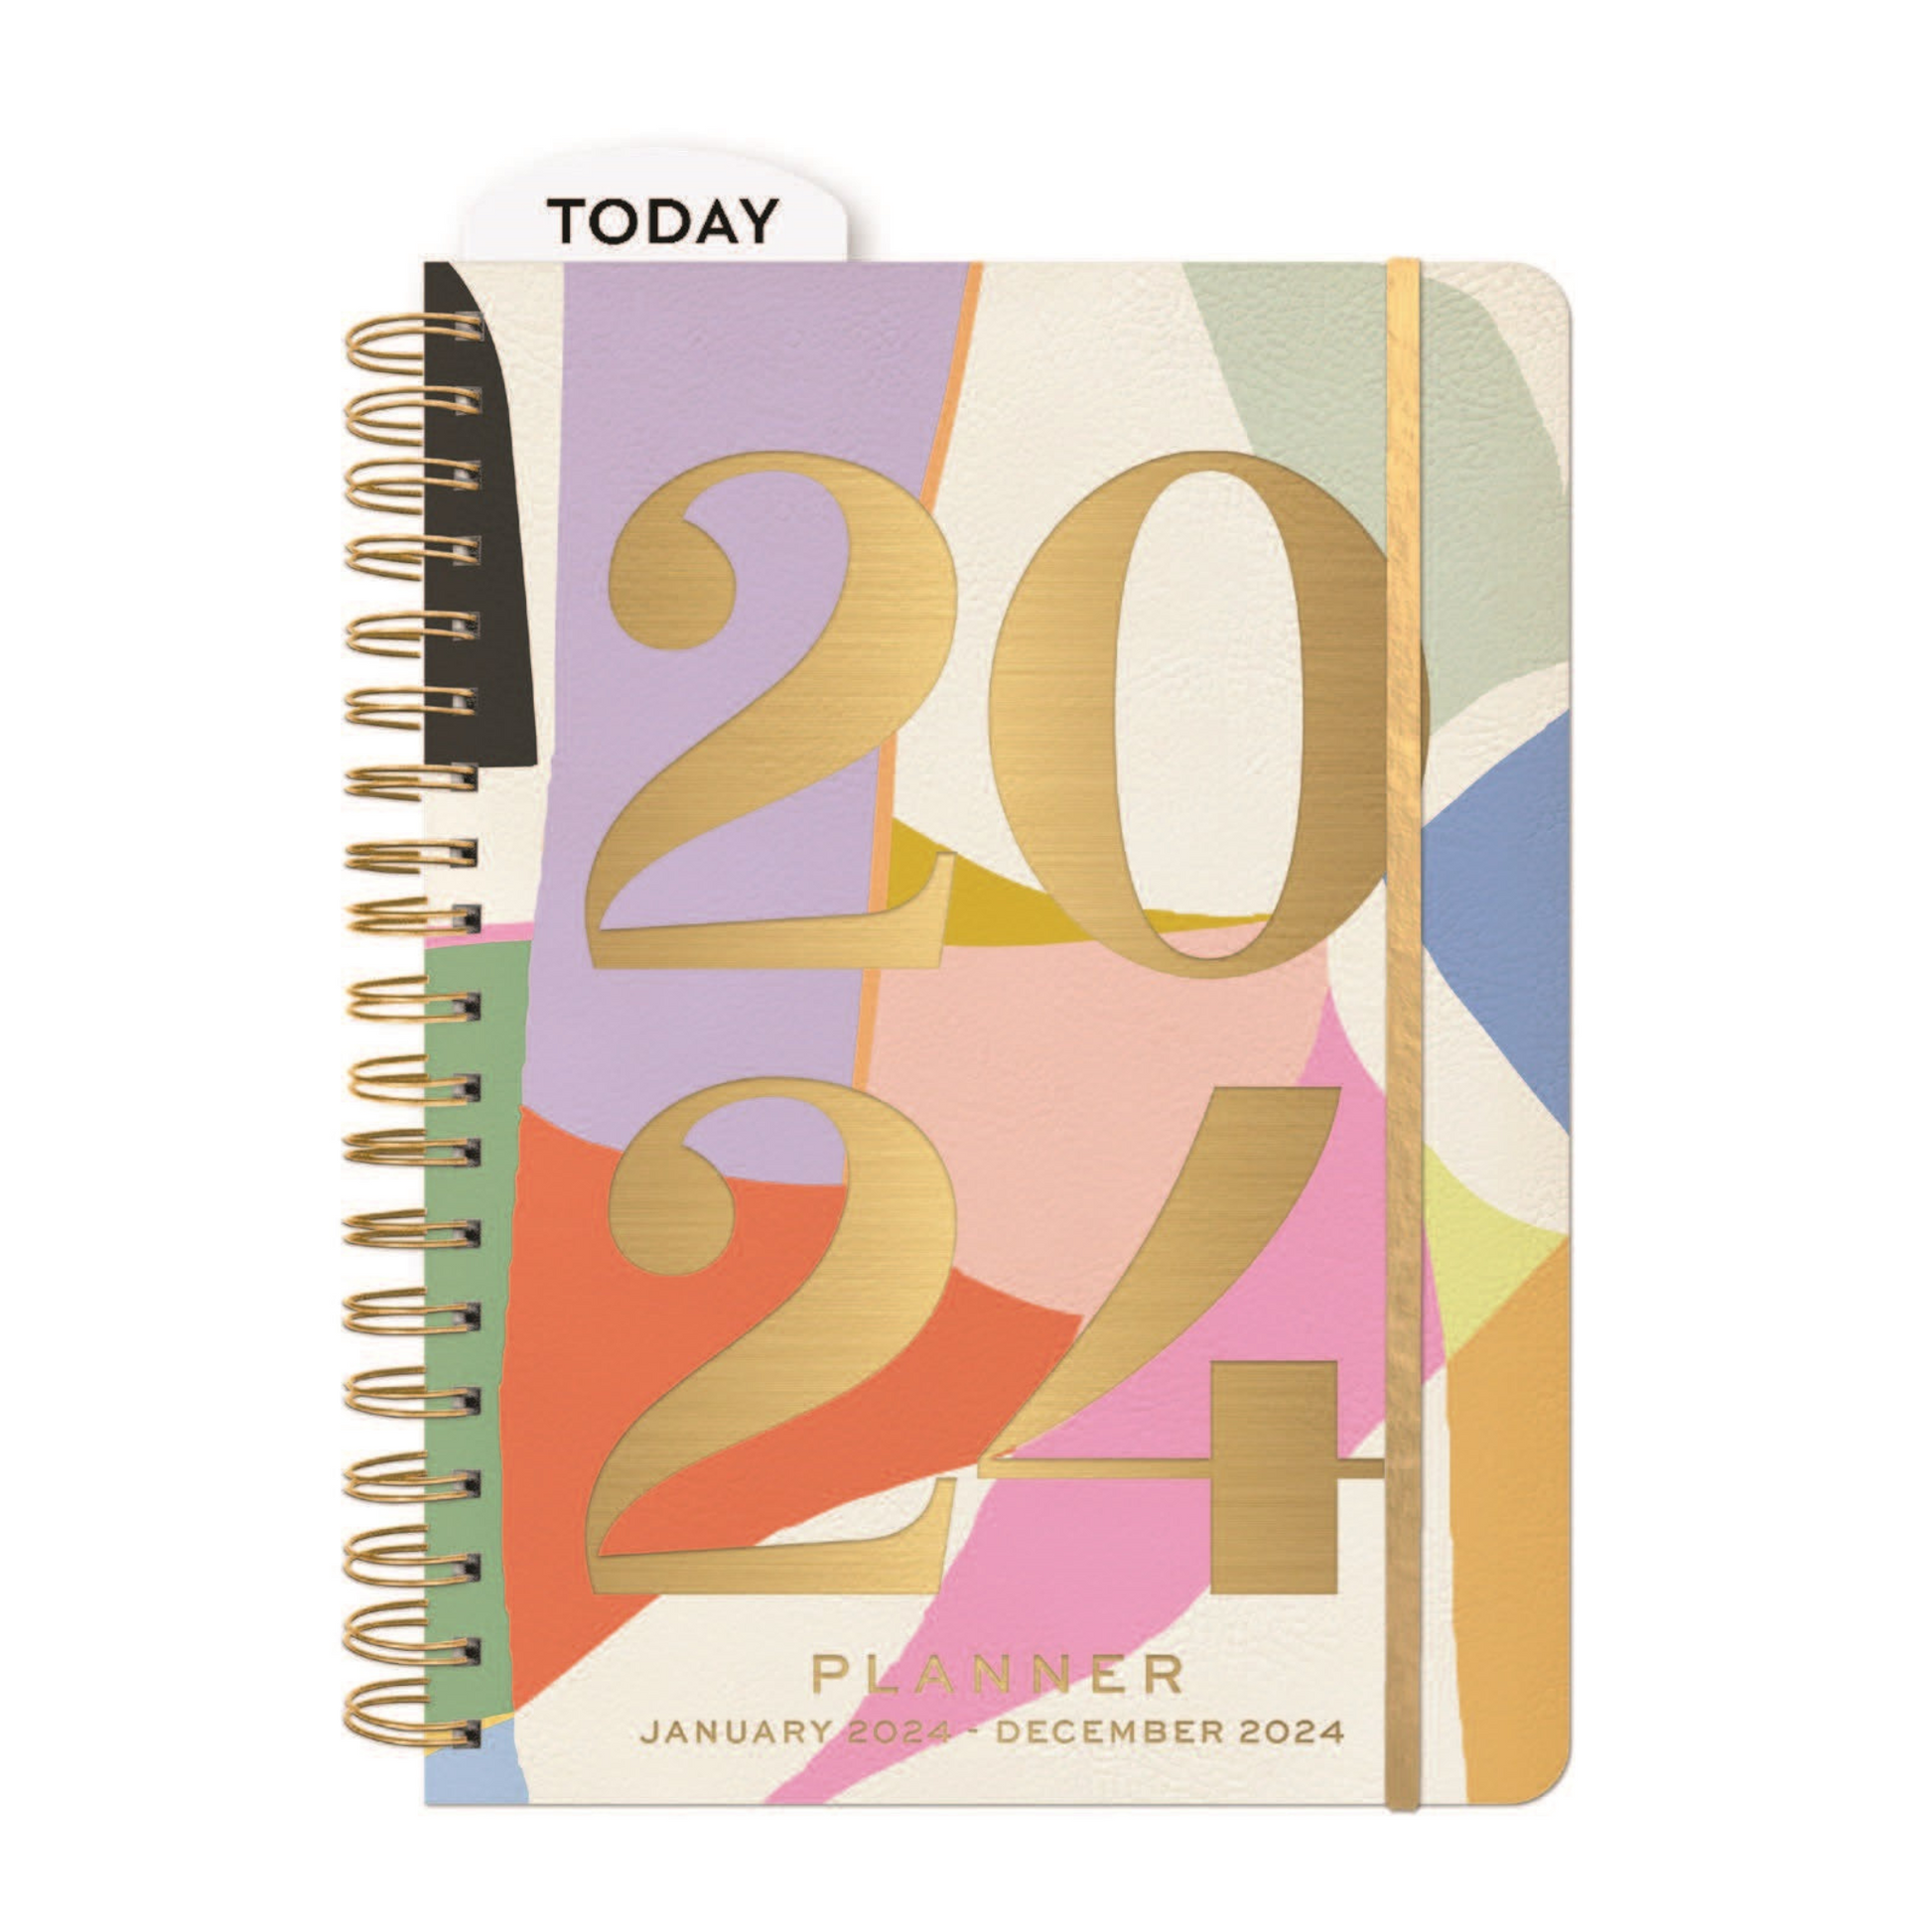 Planner on a white background with abstract and colourful design on the hard cover.